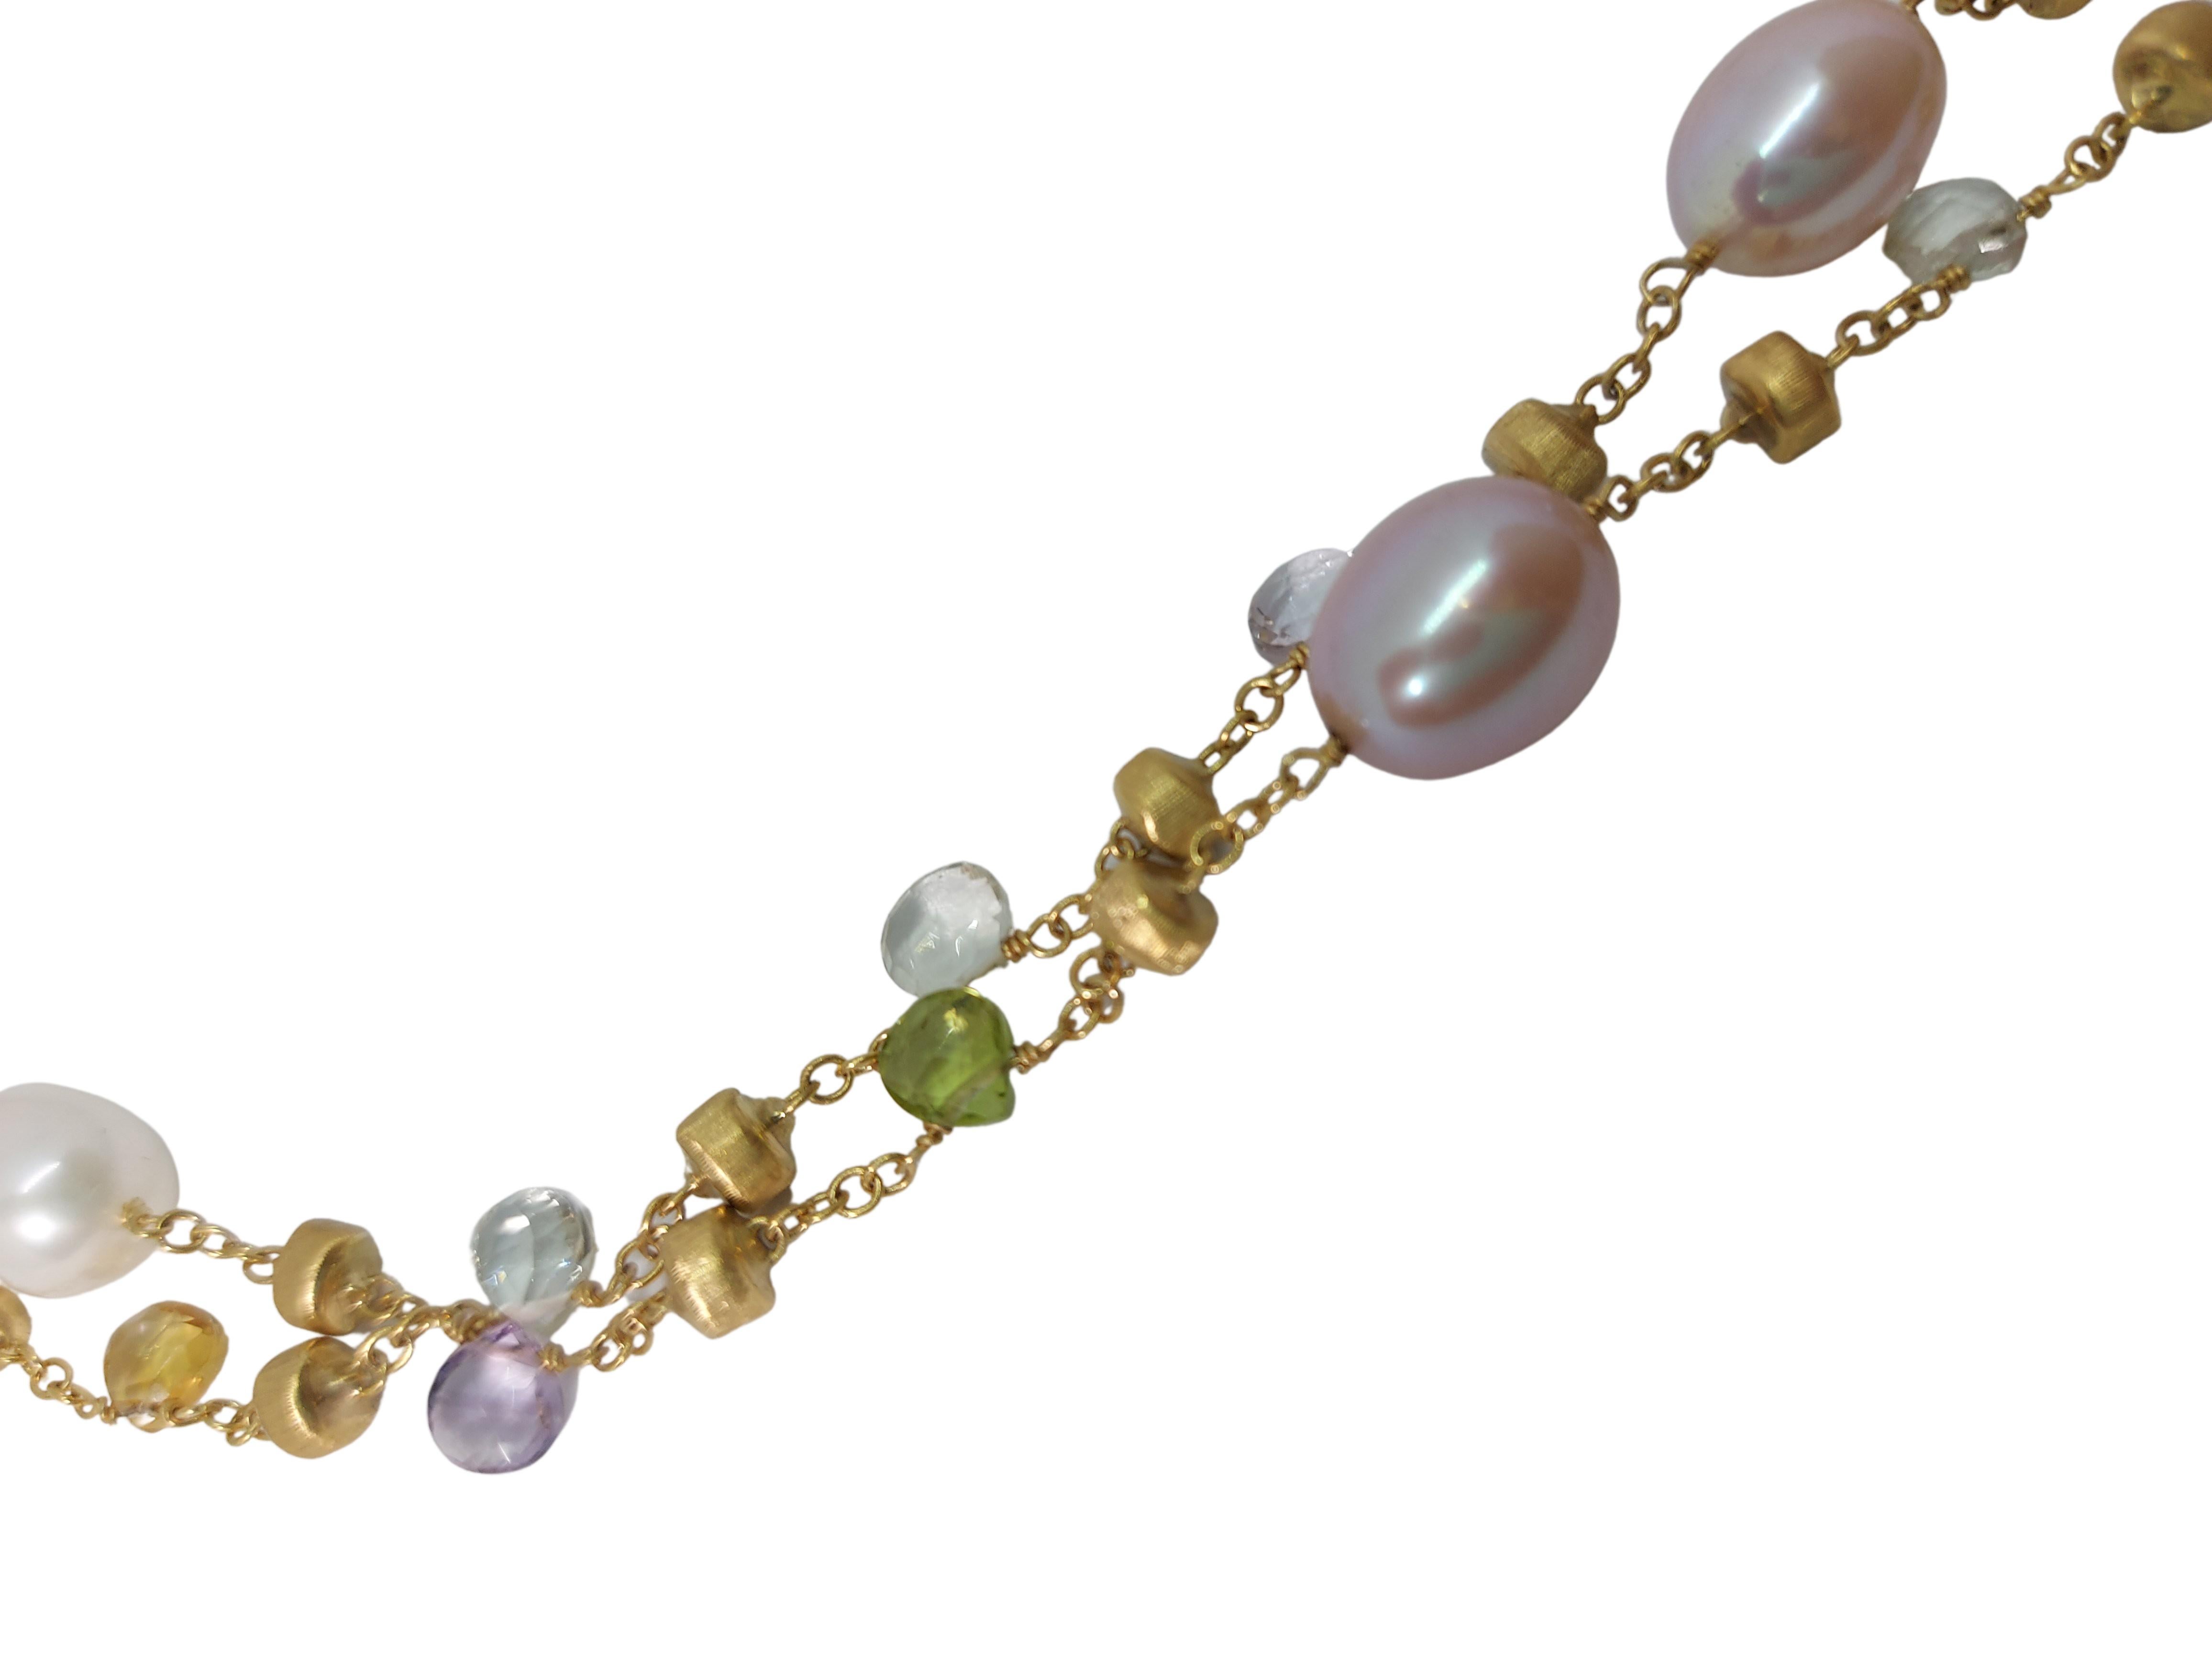 Artisan 18kt Gold Marco Bicego Long Necklace, Paradise Collection, Pearls & Gemstones